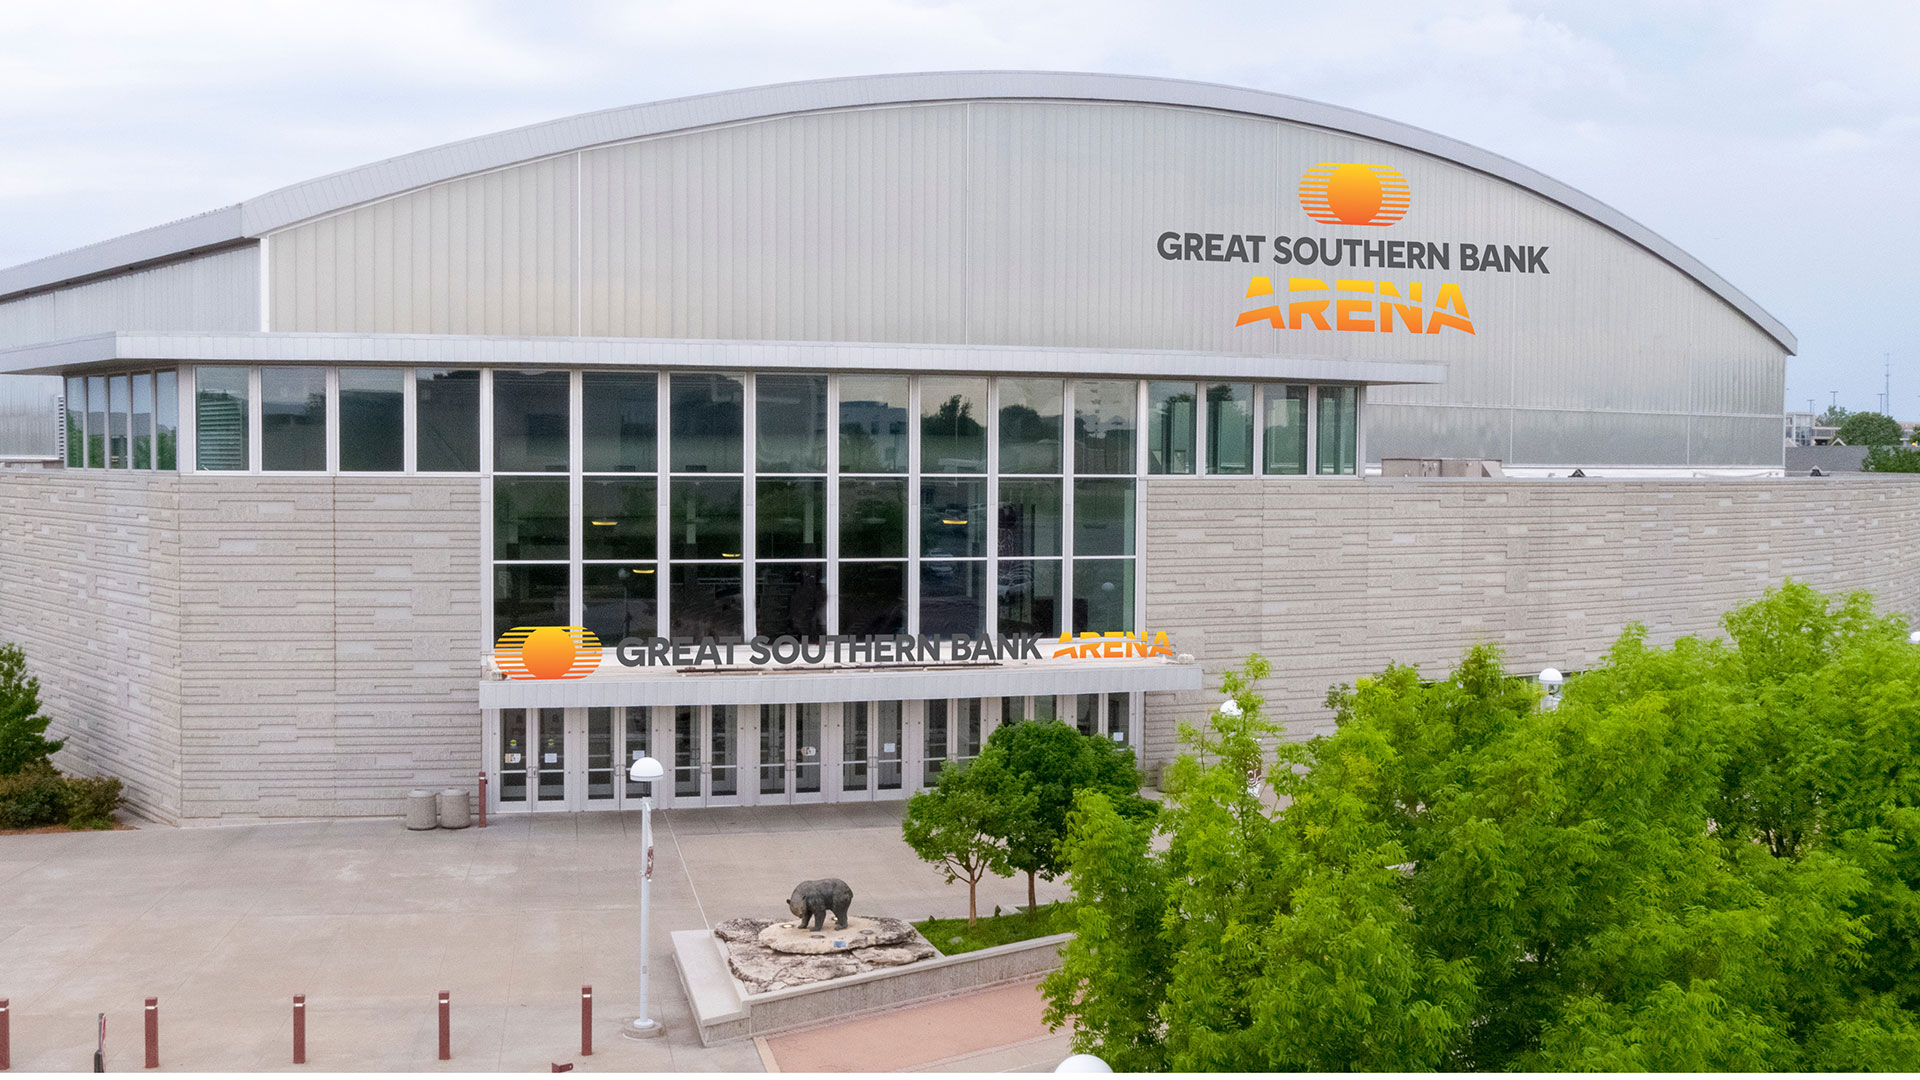 Aerial view of Great Southern Bank arena exterior